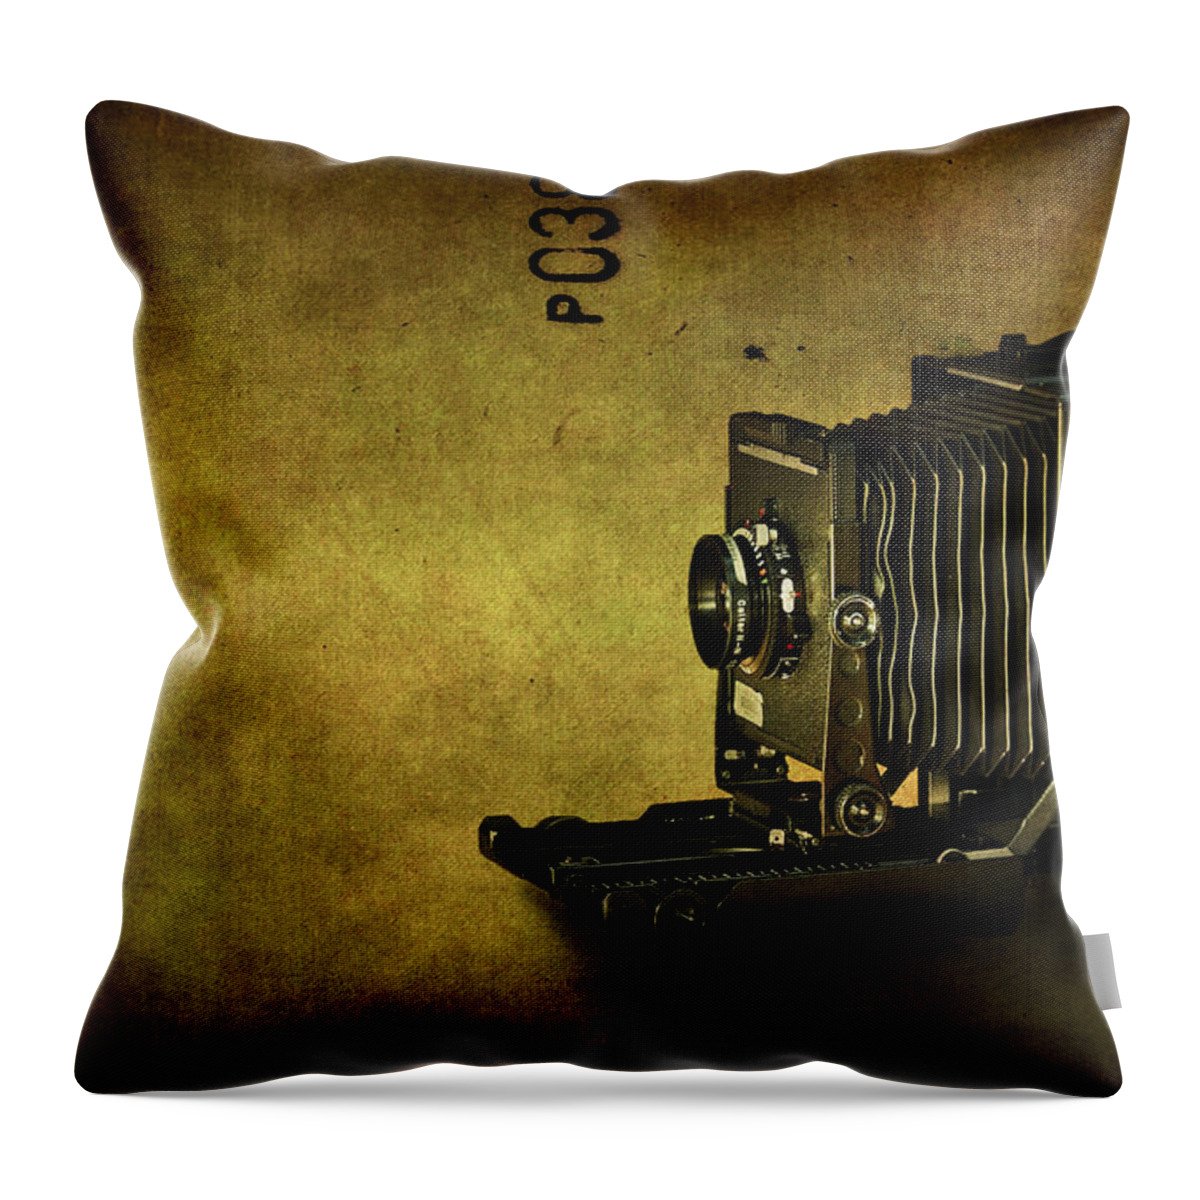 Camera Throw Pillow featuring the photograph Old School by Evelina Kremsdorf